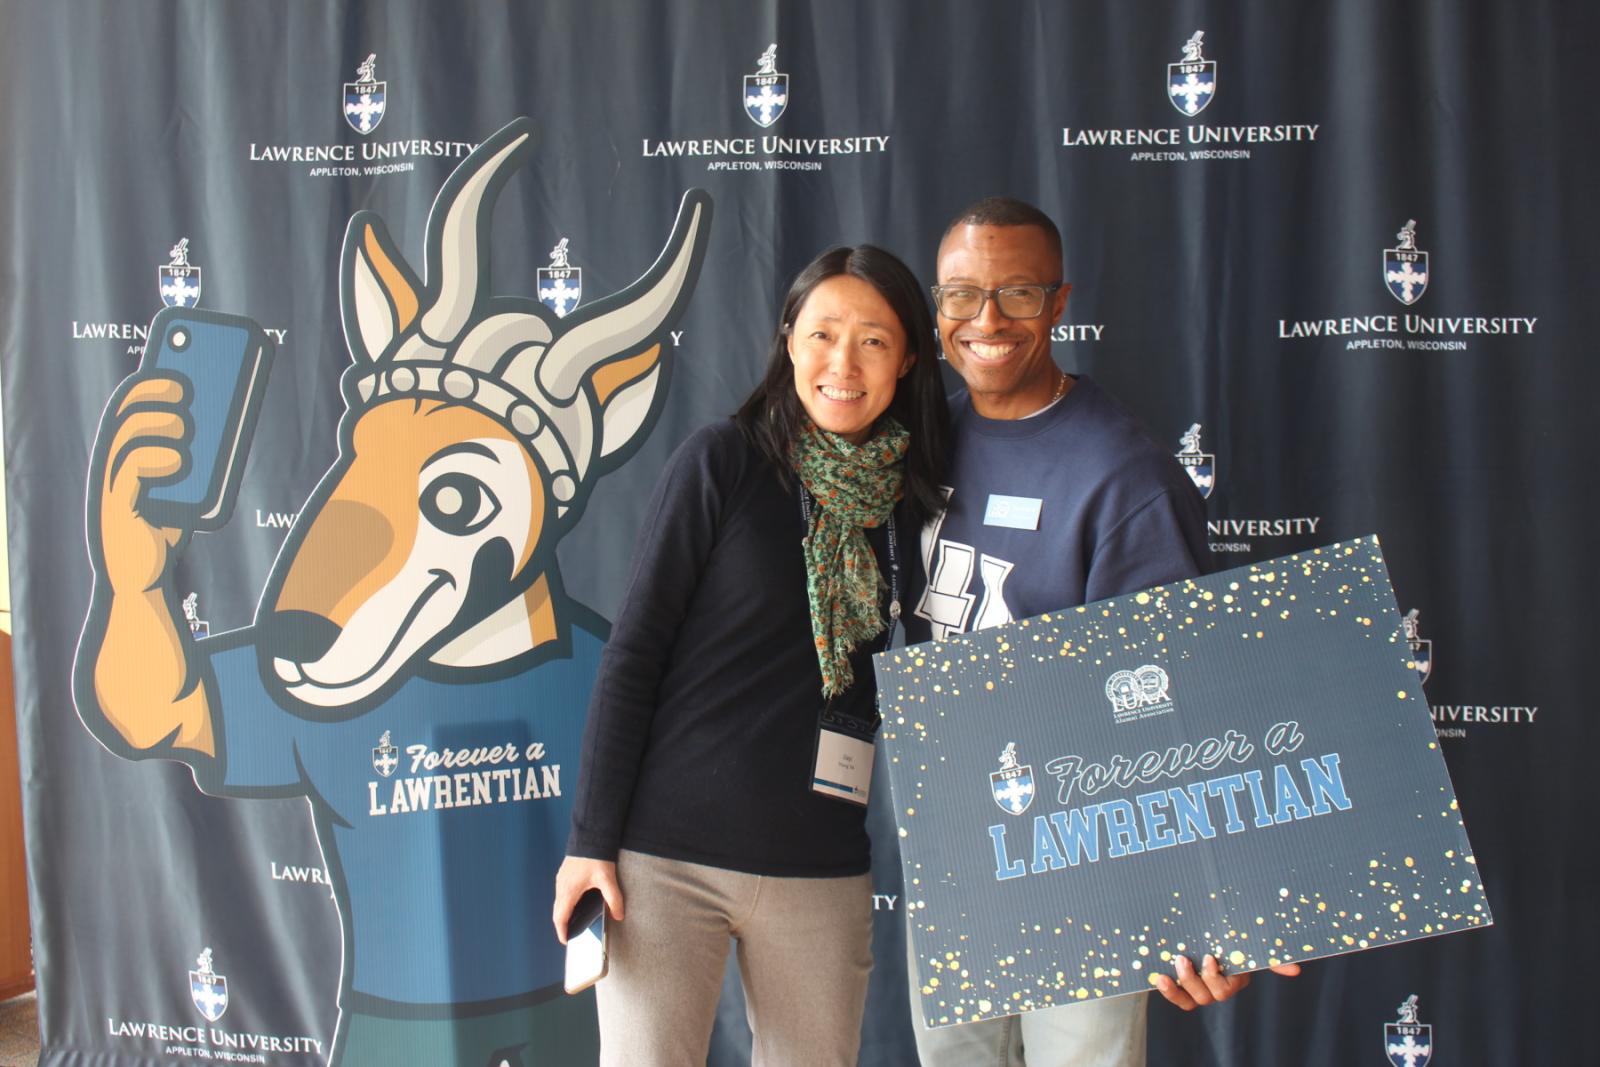 Jiayi Ling Young '94 and Tracy Donald '95 pose with Forever a Lawrentian signs.